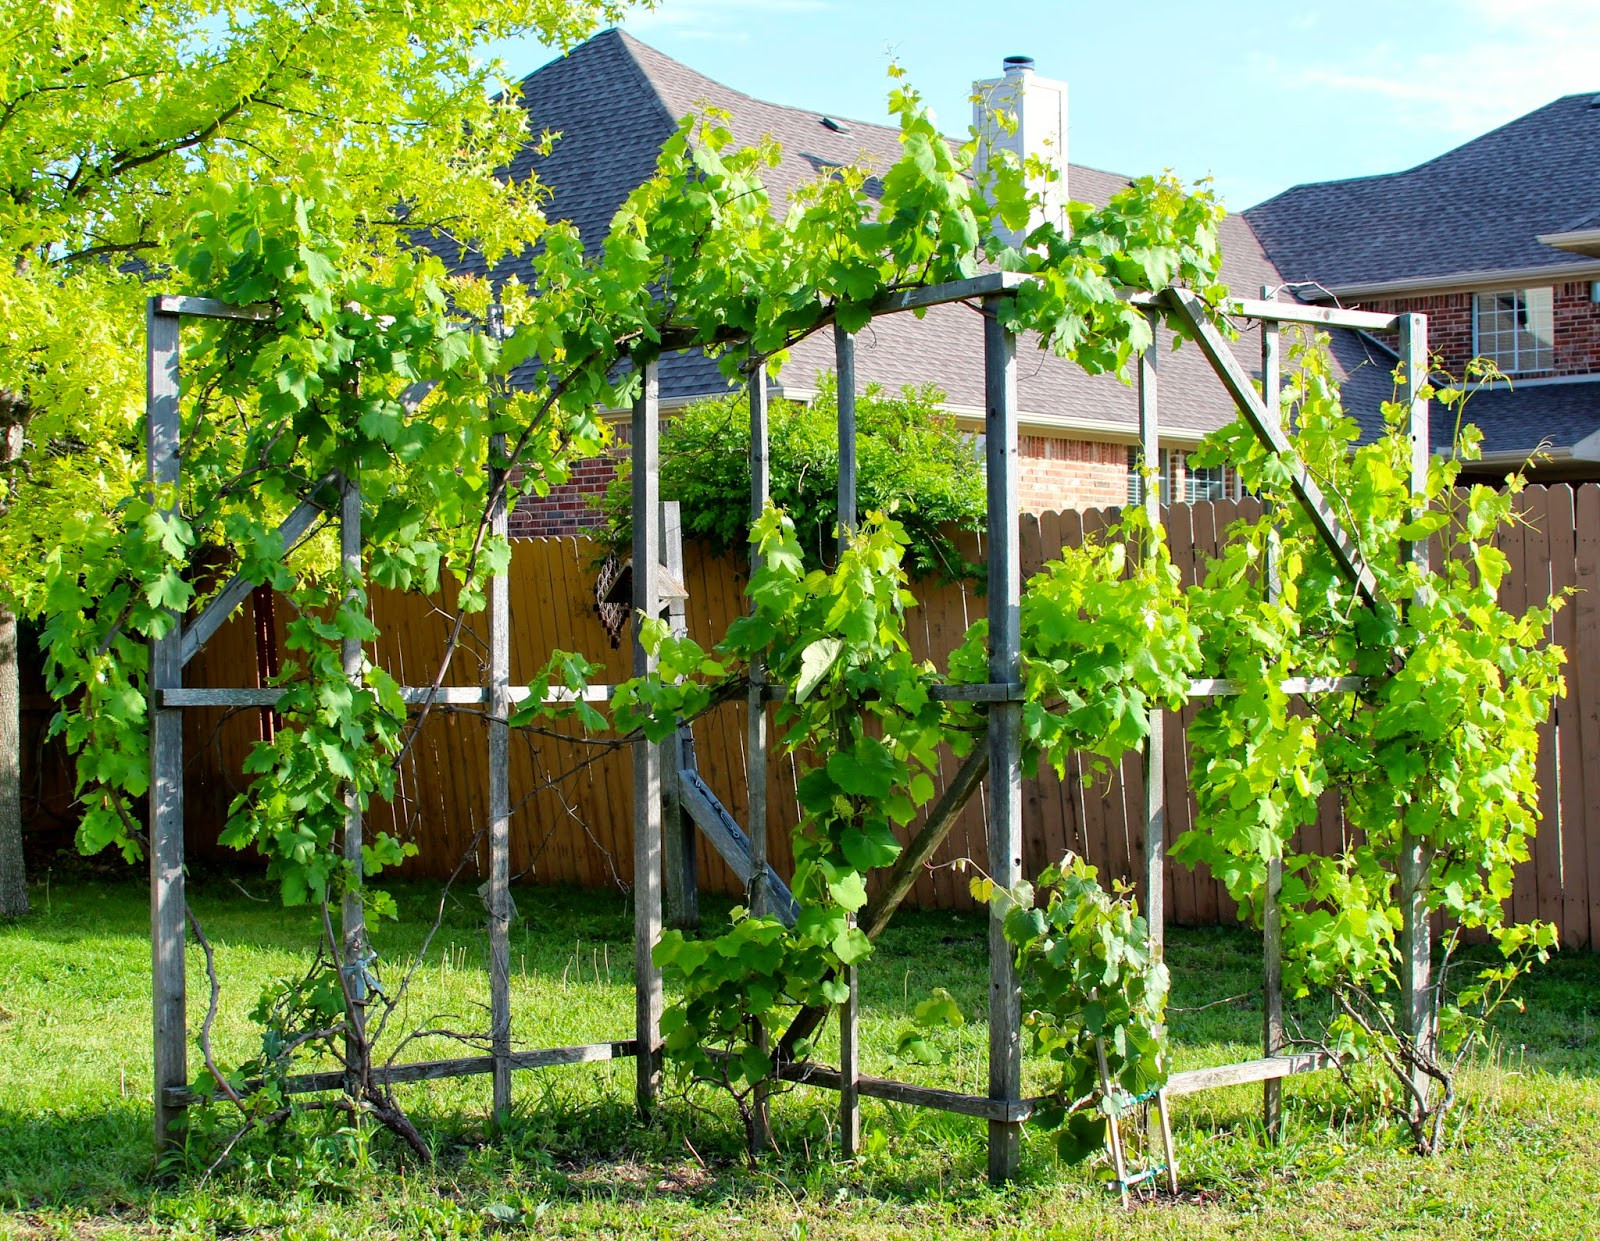 Growing Grapes In Backyard
 Rainbow Magic Sparkle Butterfly Early May 2014 The